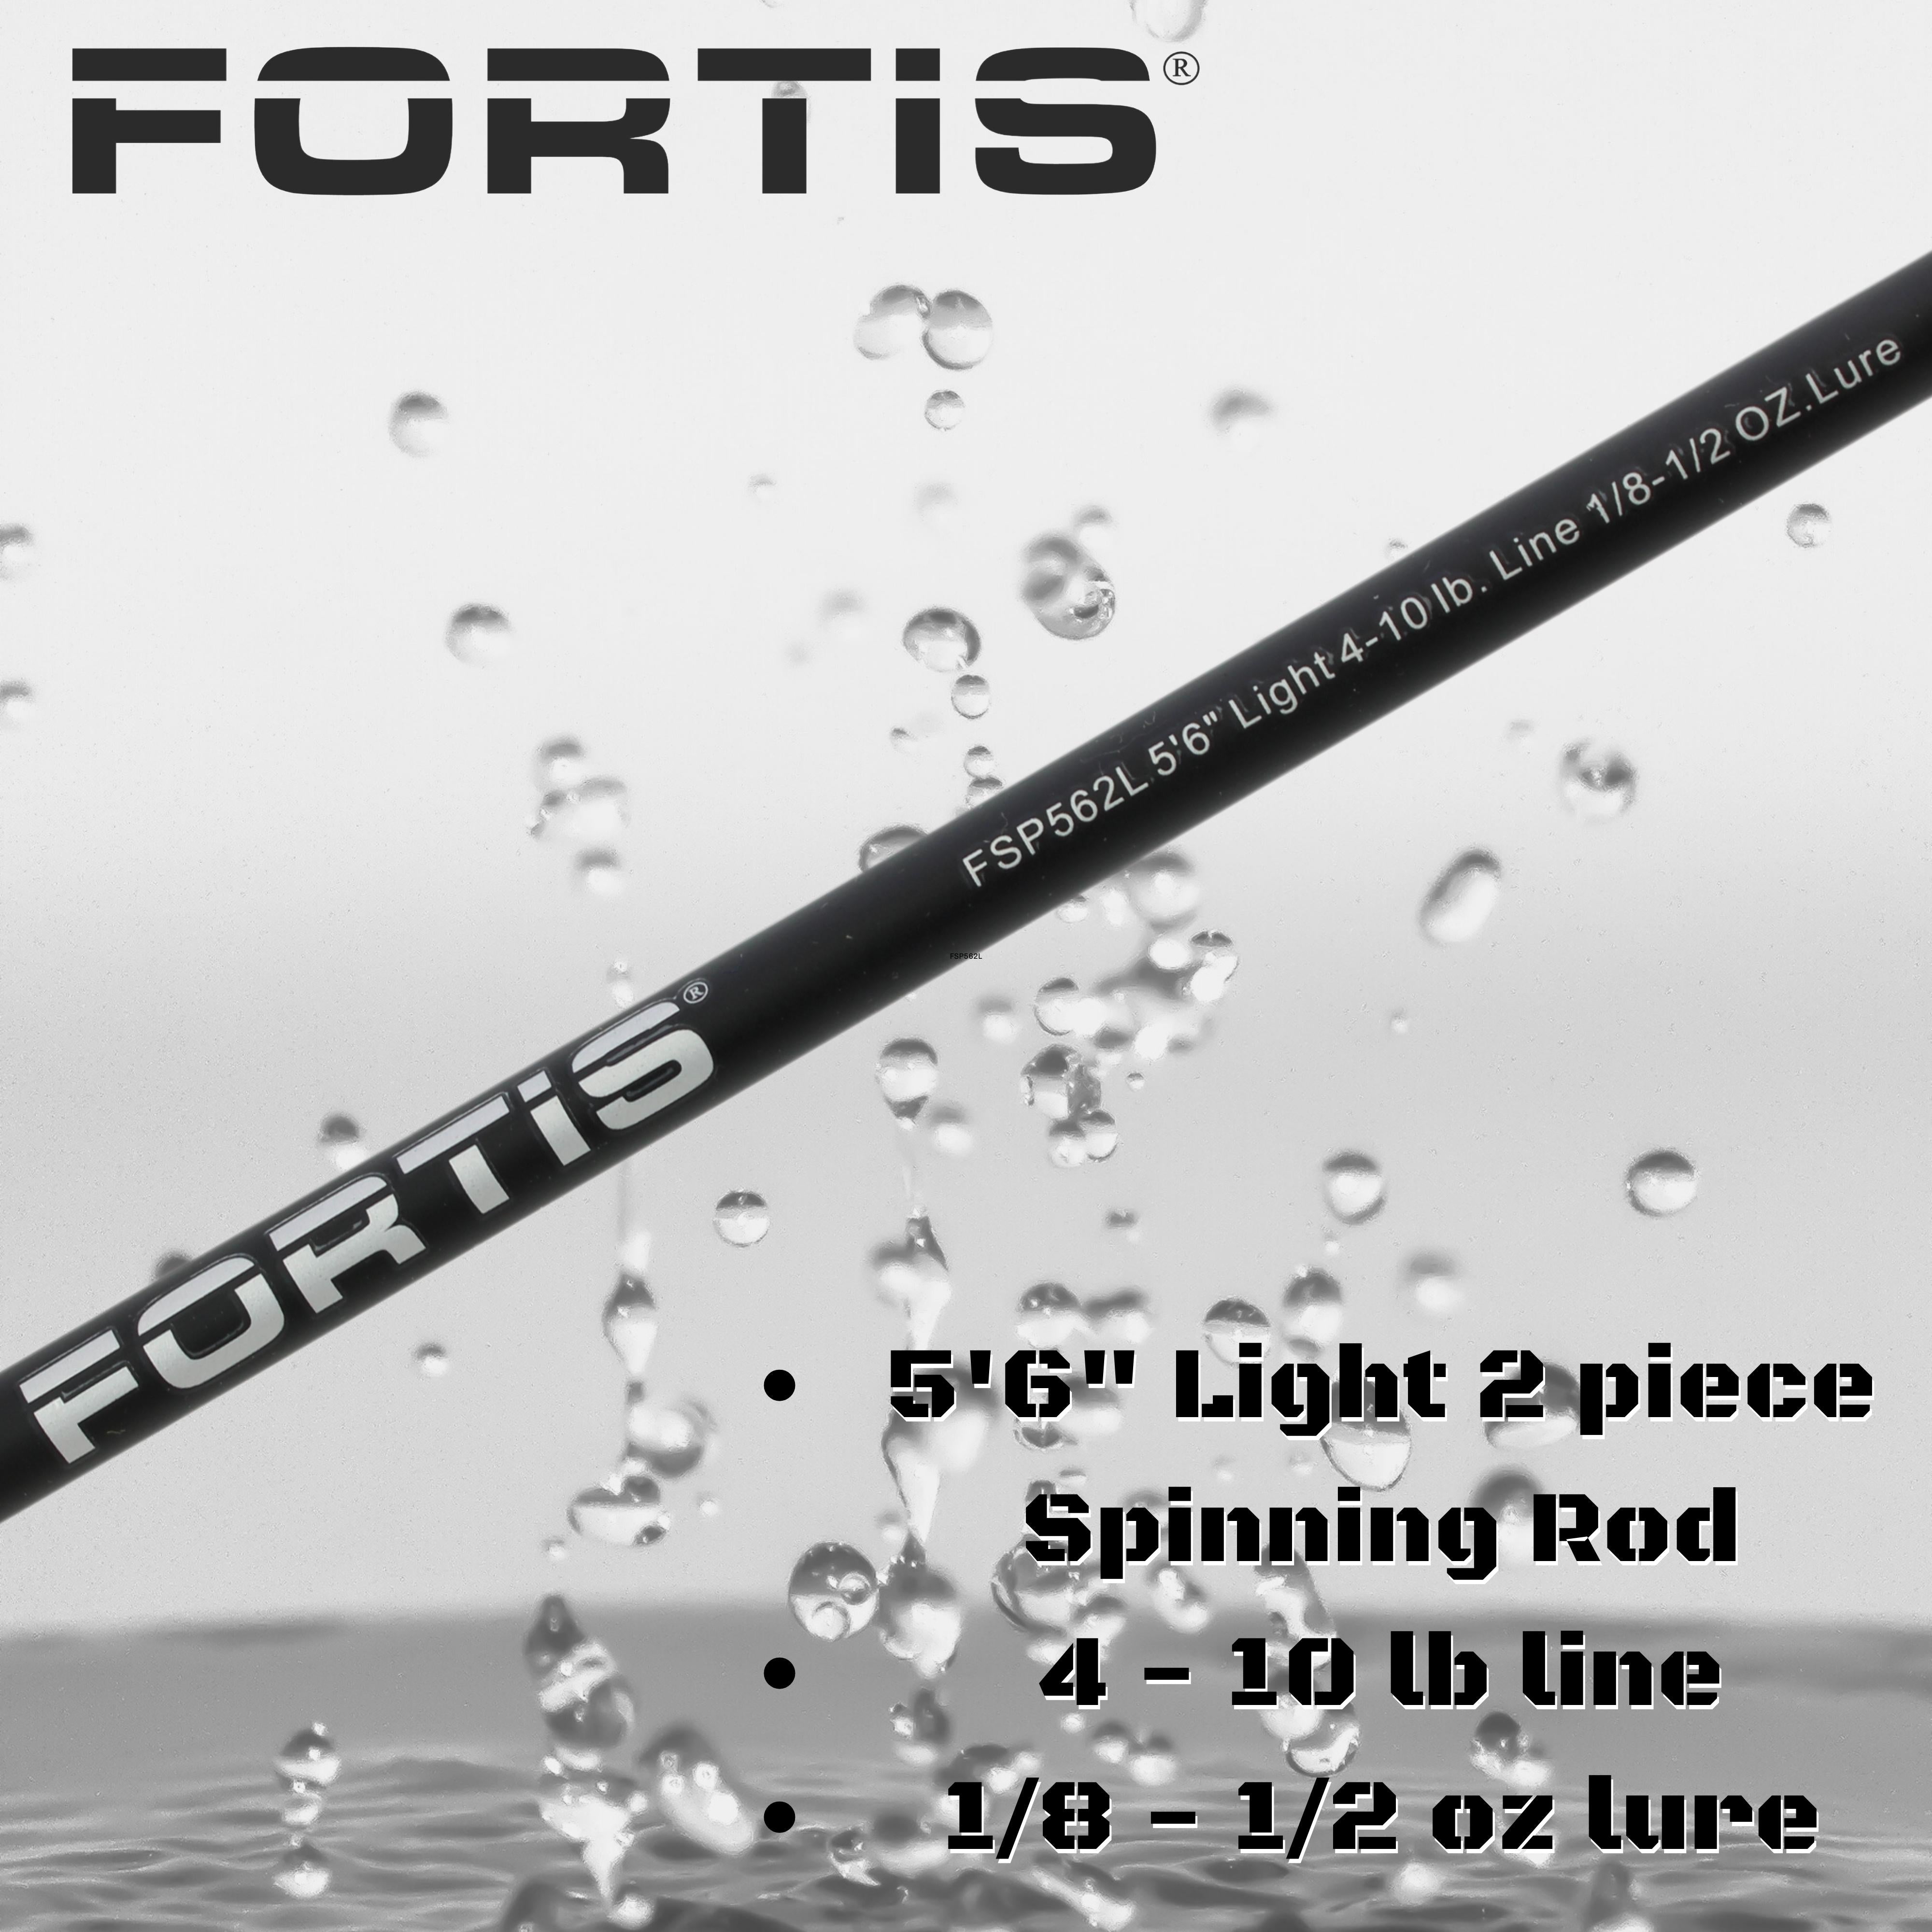 Fortis 5' 6" Light Action 2 Piece Spinning Rod